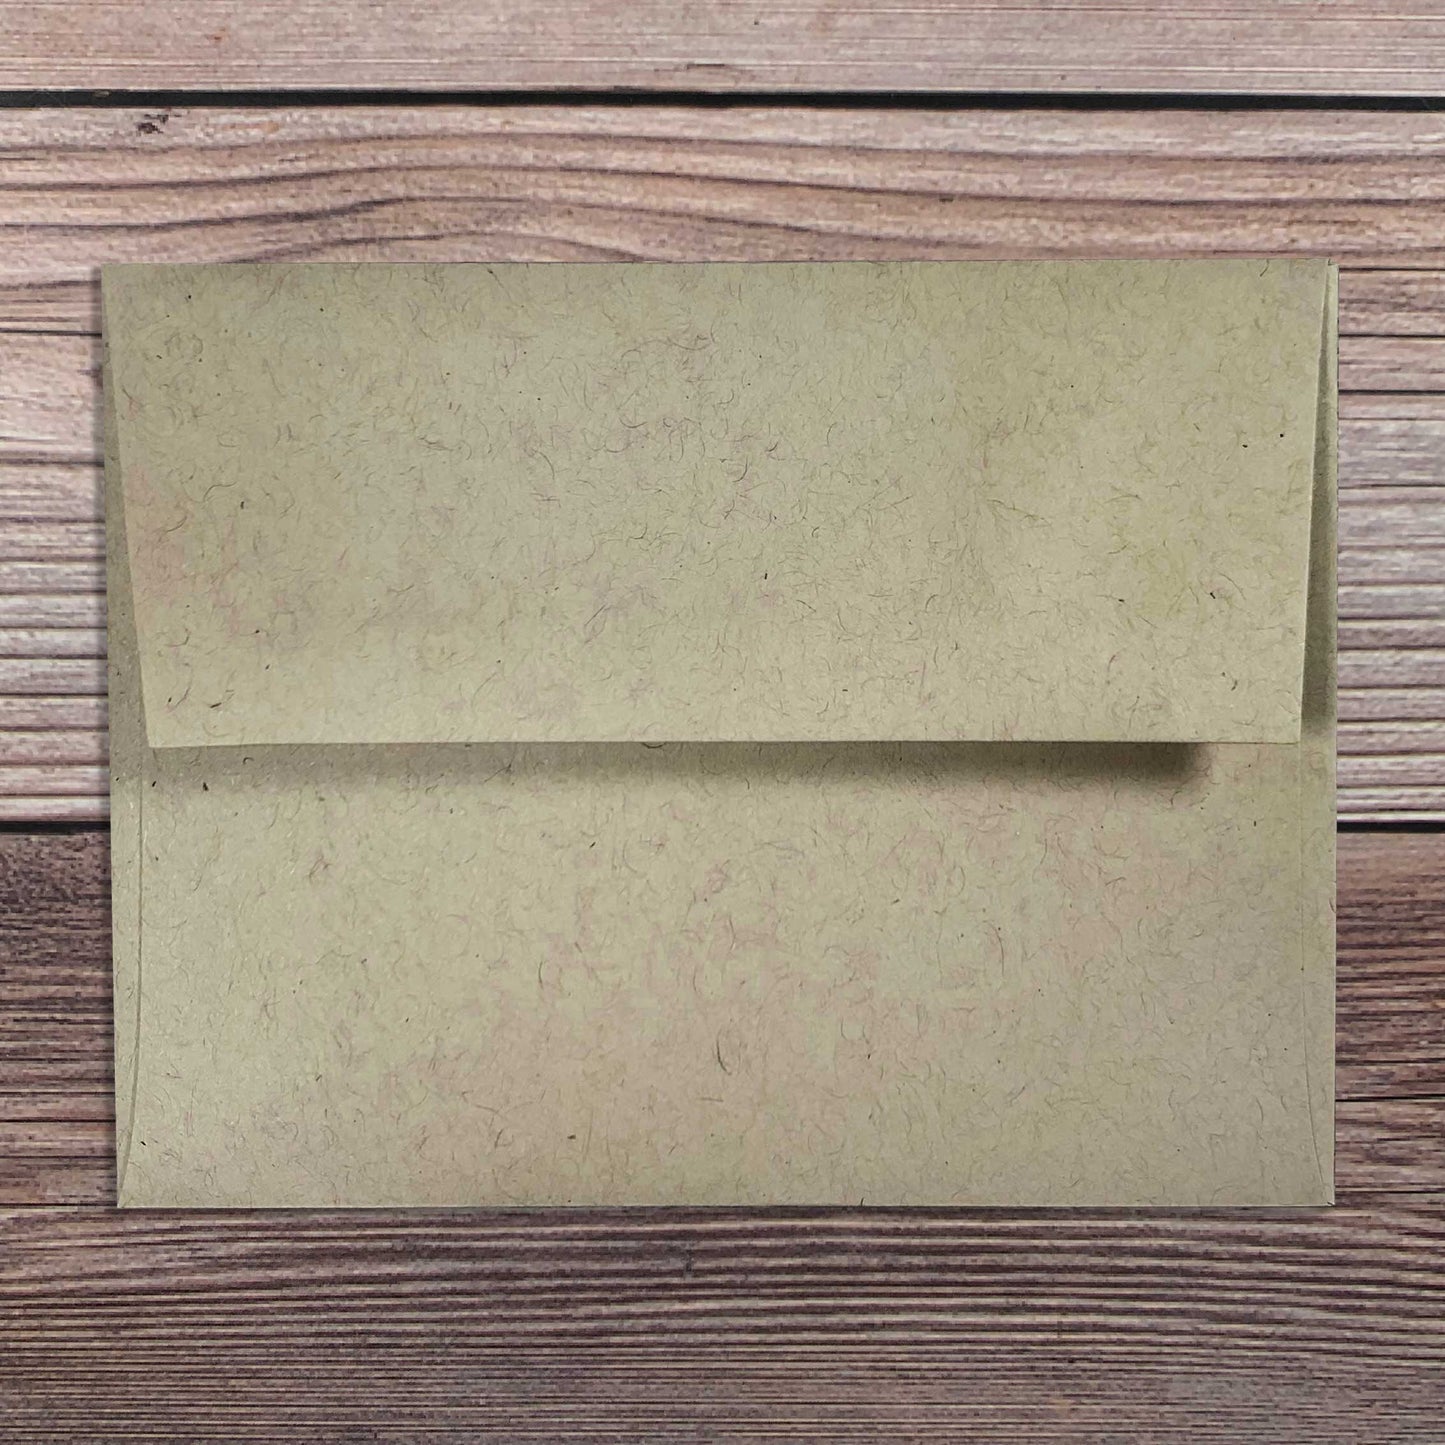 Greeting Card envelope, kraft color, square flap, included with letterpress affirmation greeting card.